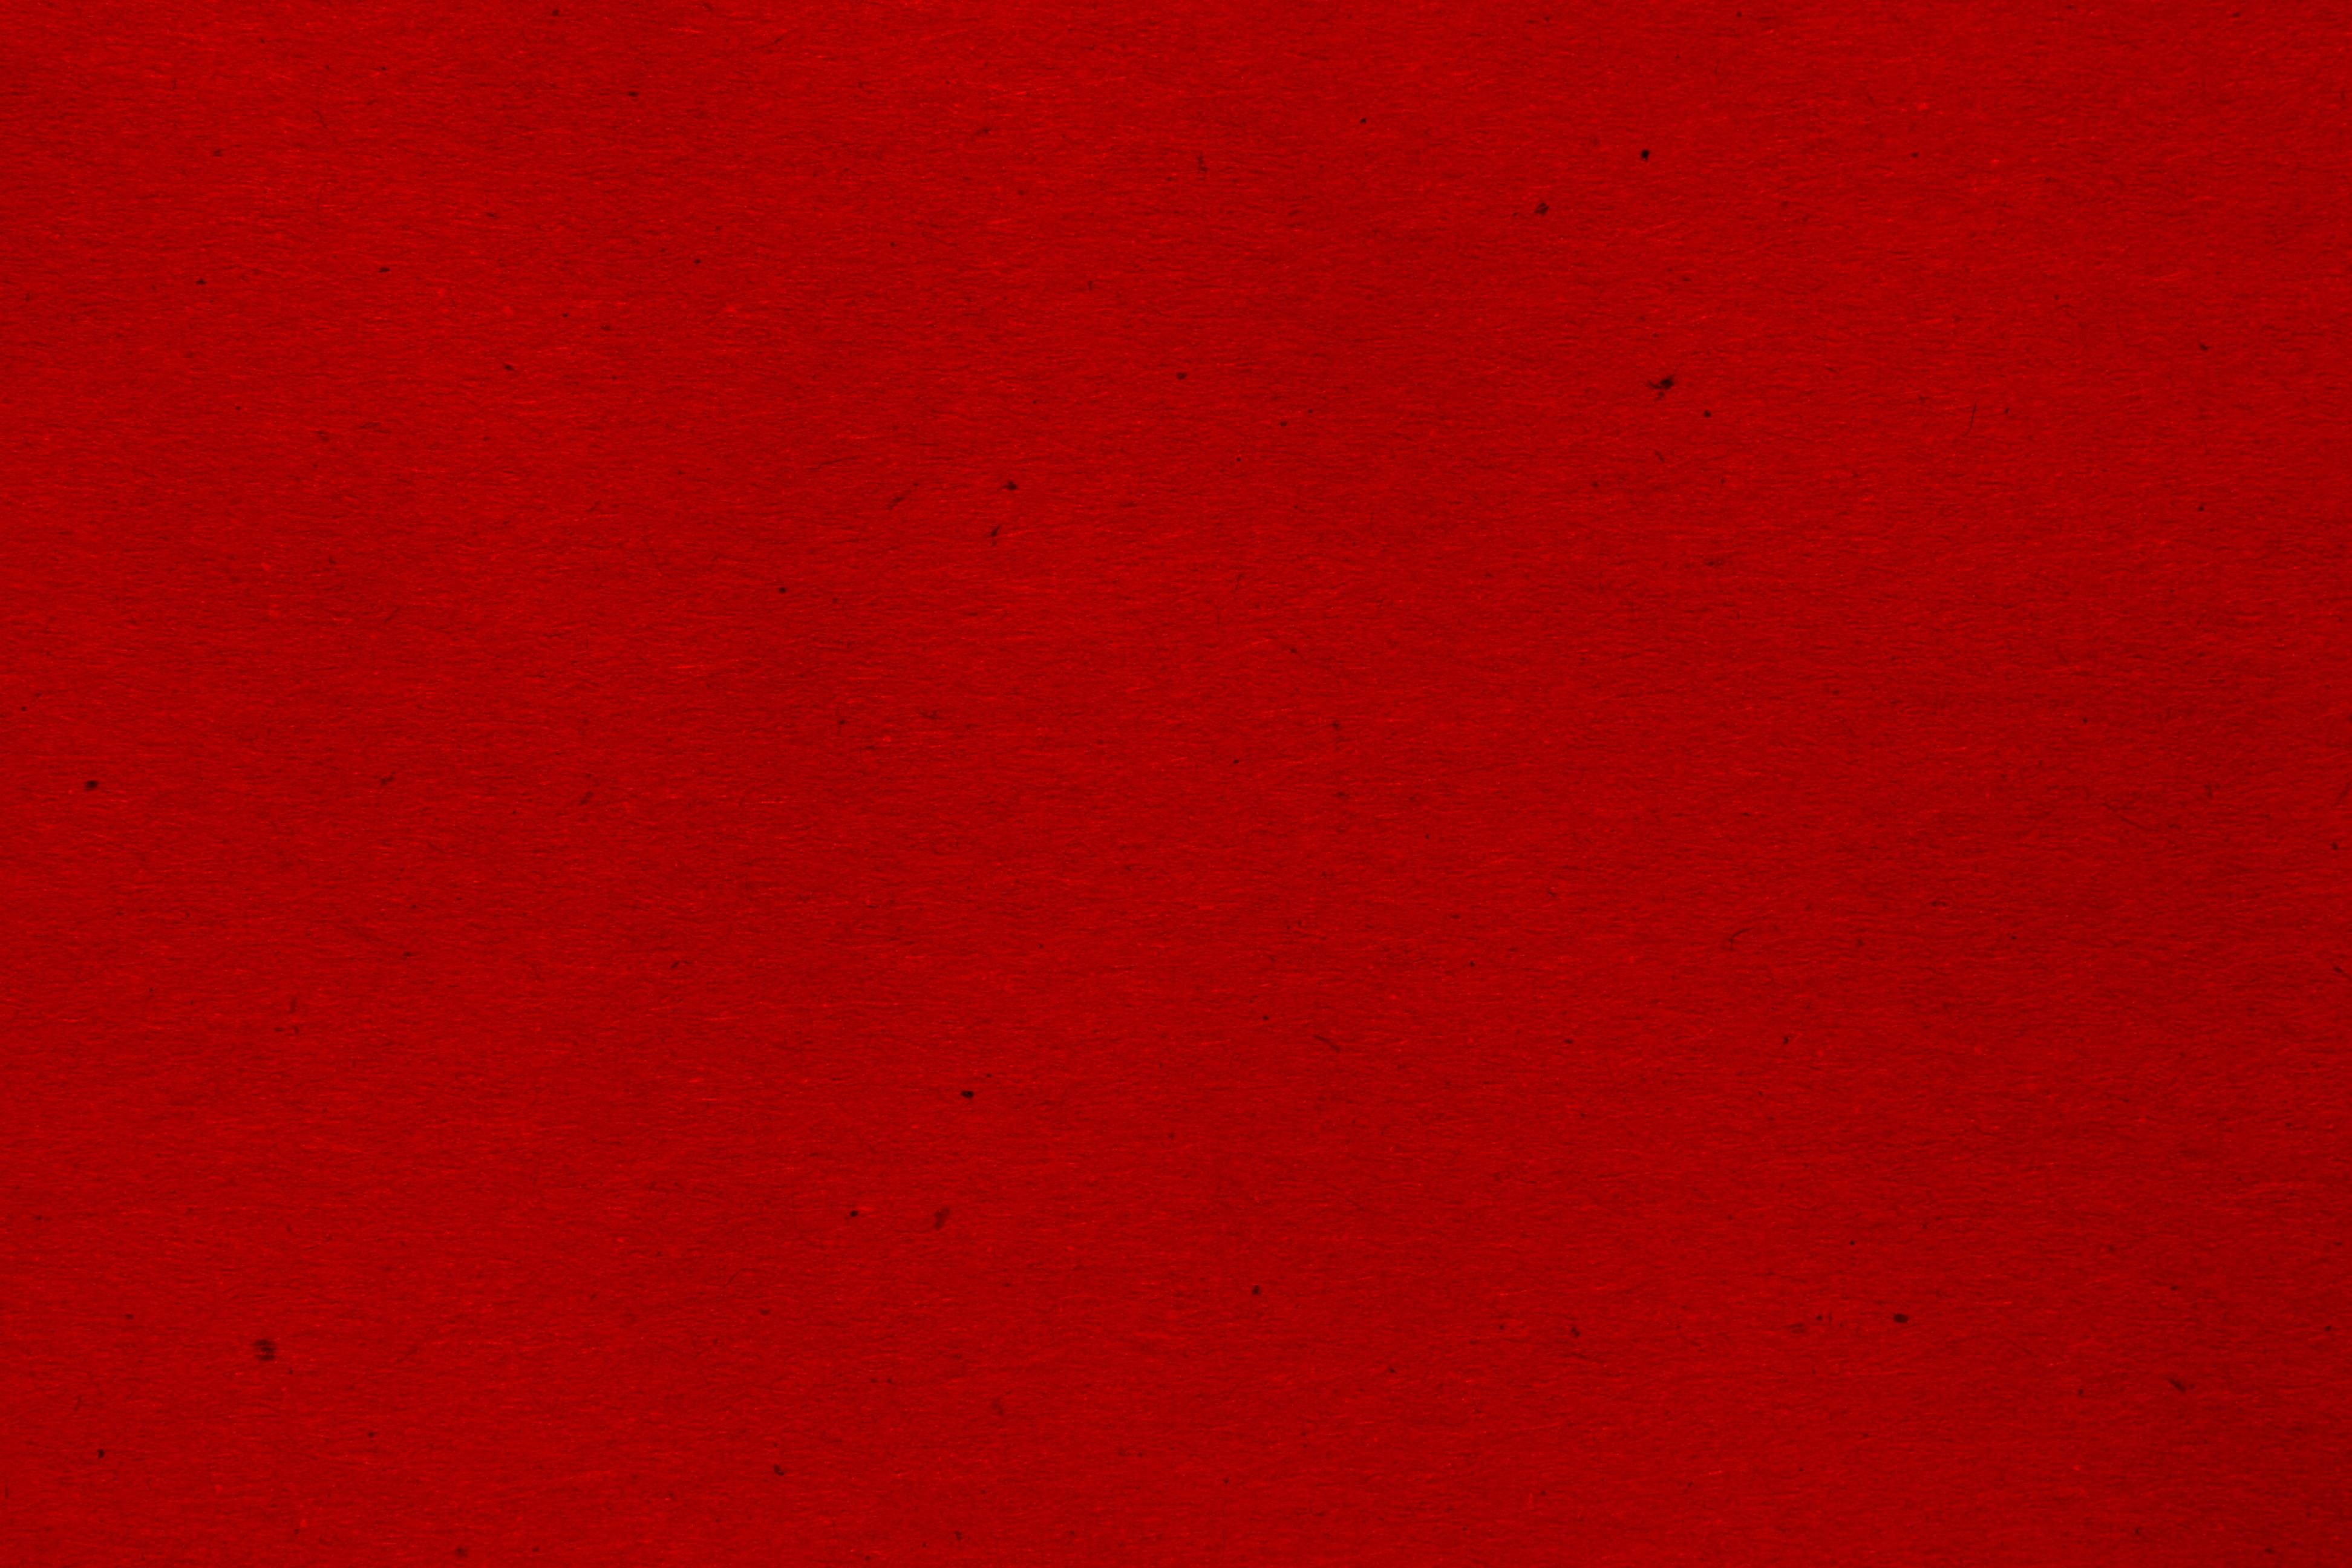 Deep red paper texture with flecks picture free photograph photo